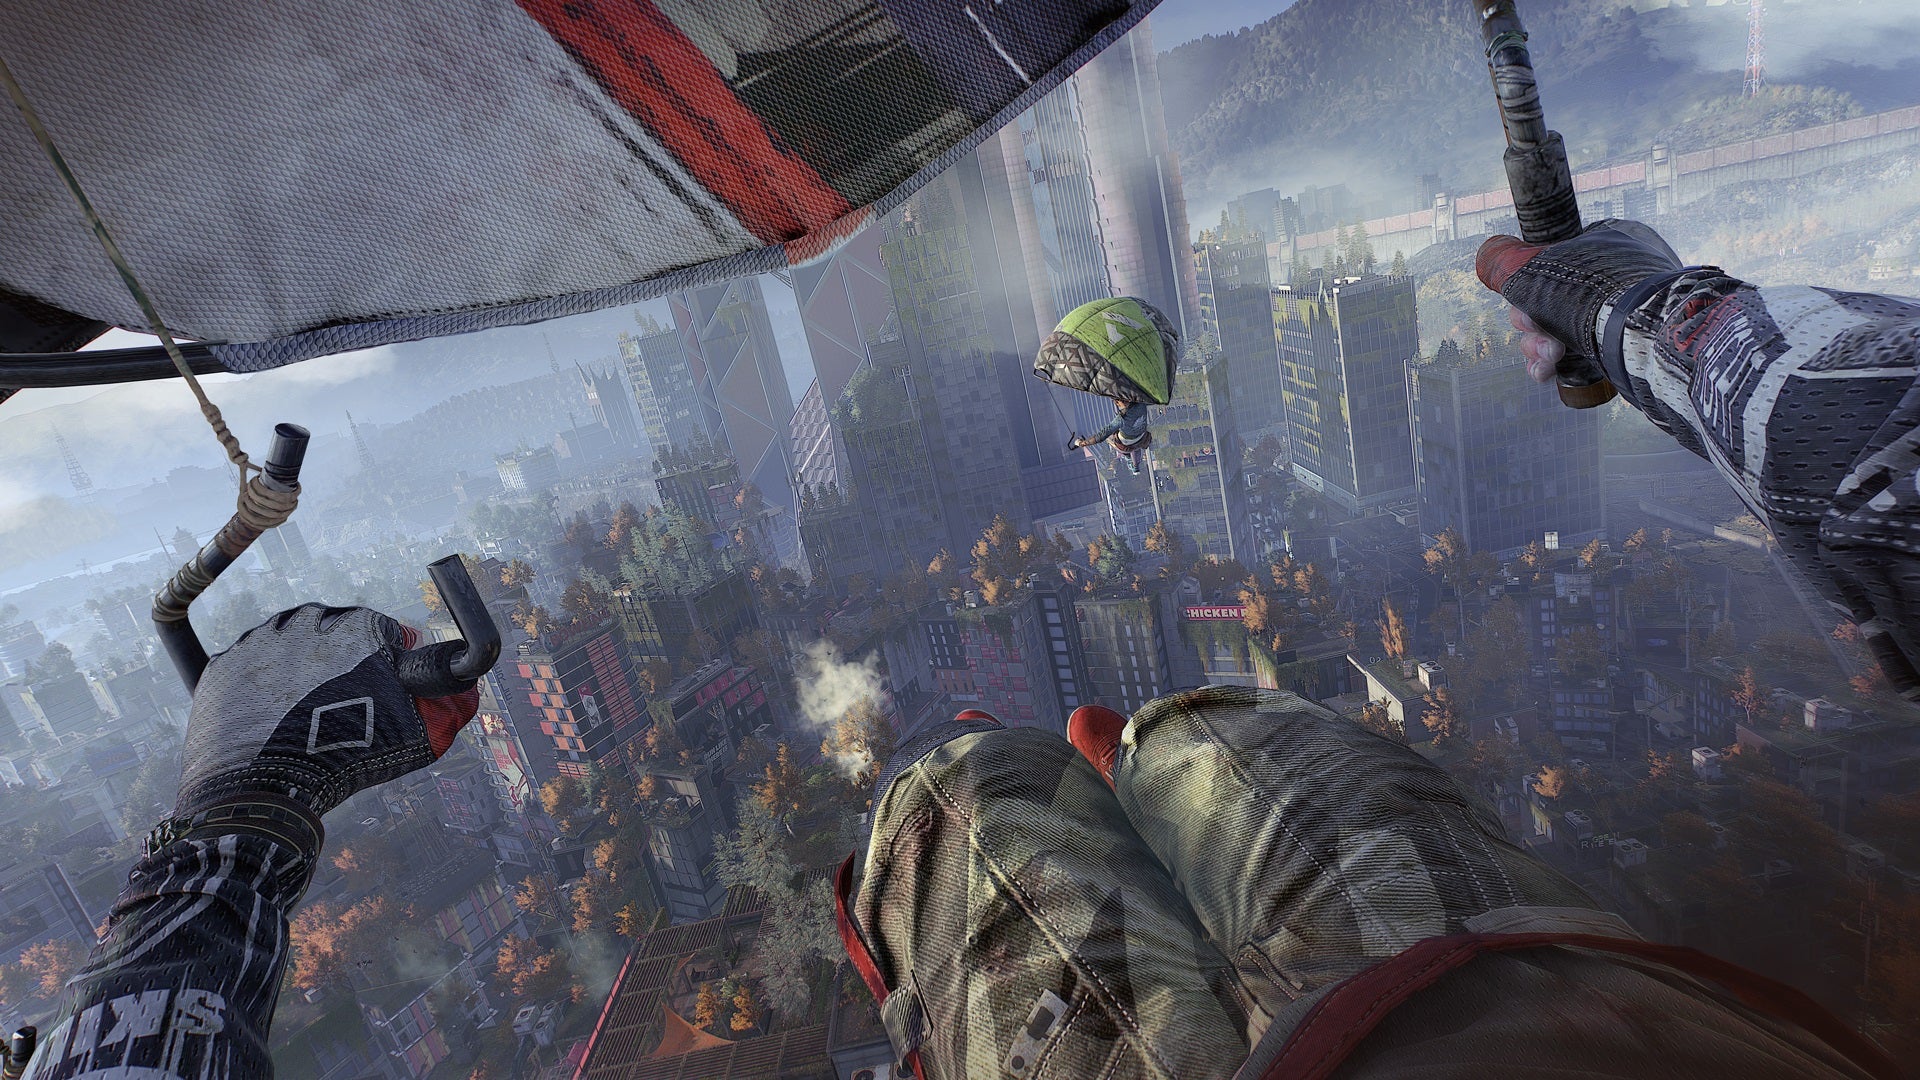 First-person hang-gliding over the city in Dying Light 2.